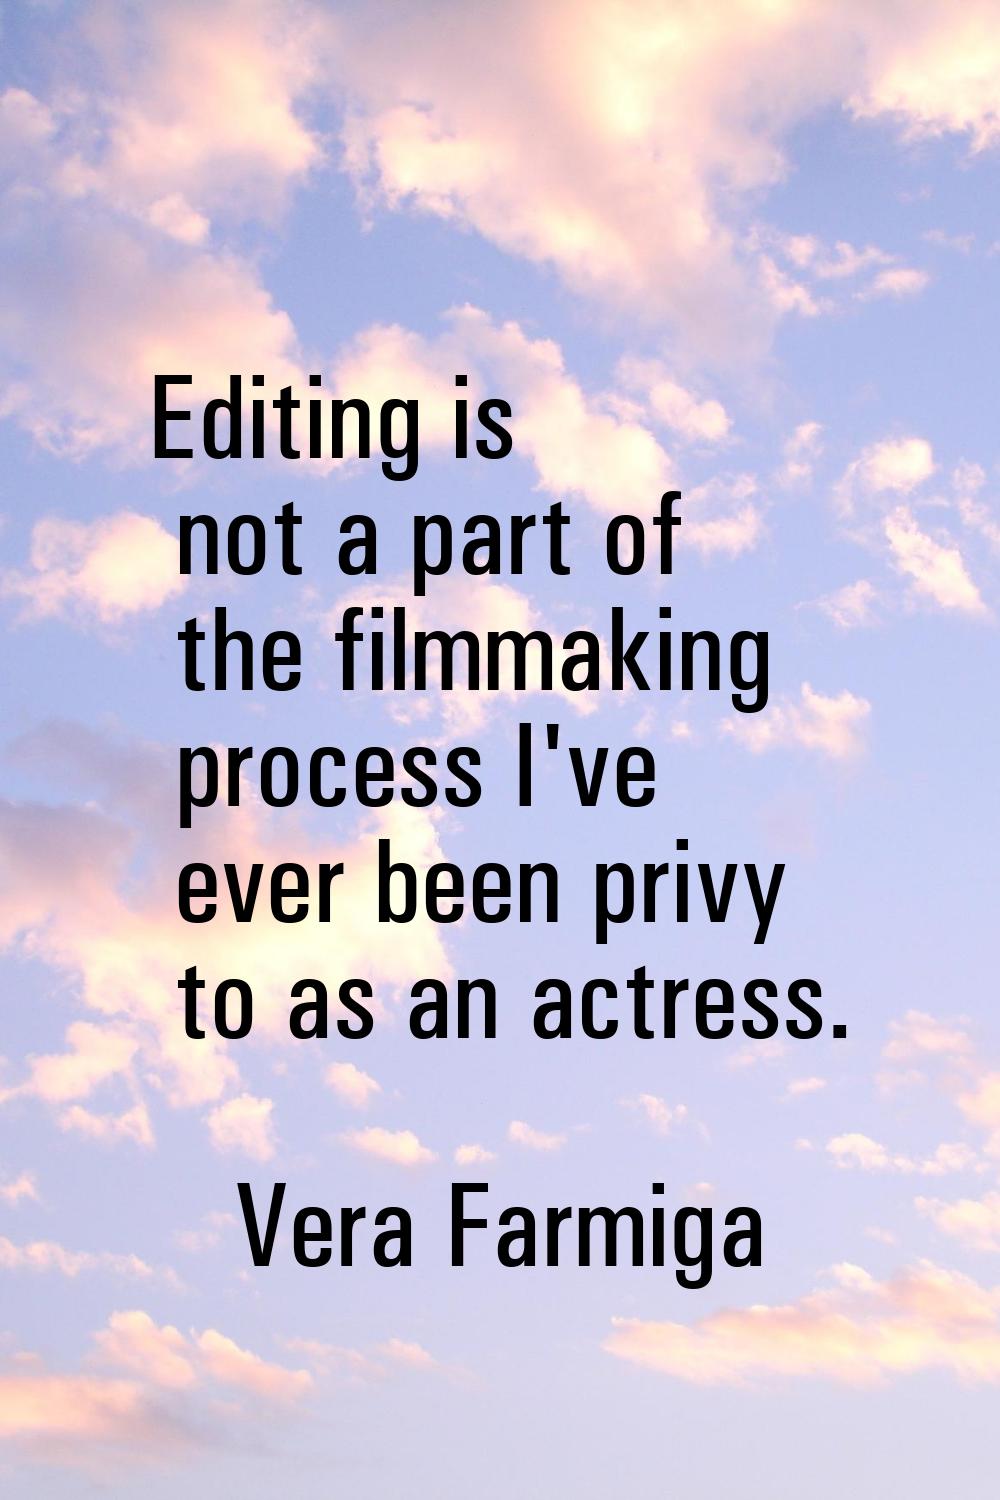 Editing is not a part of the filmmaking process I've ever been privy to as an actress.